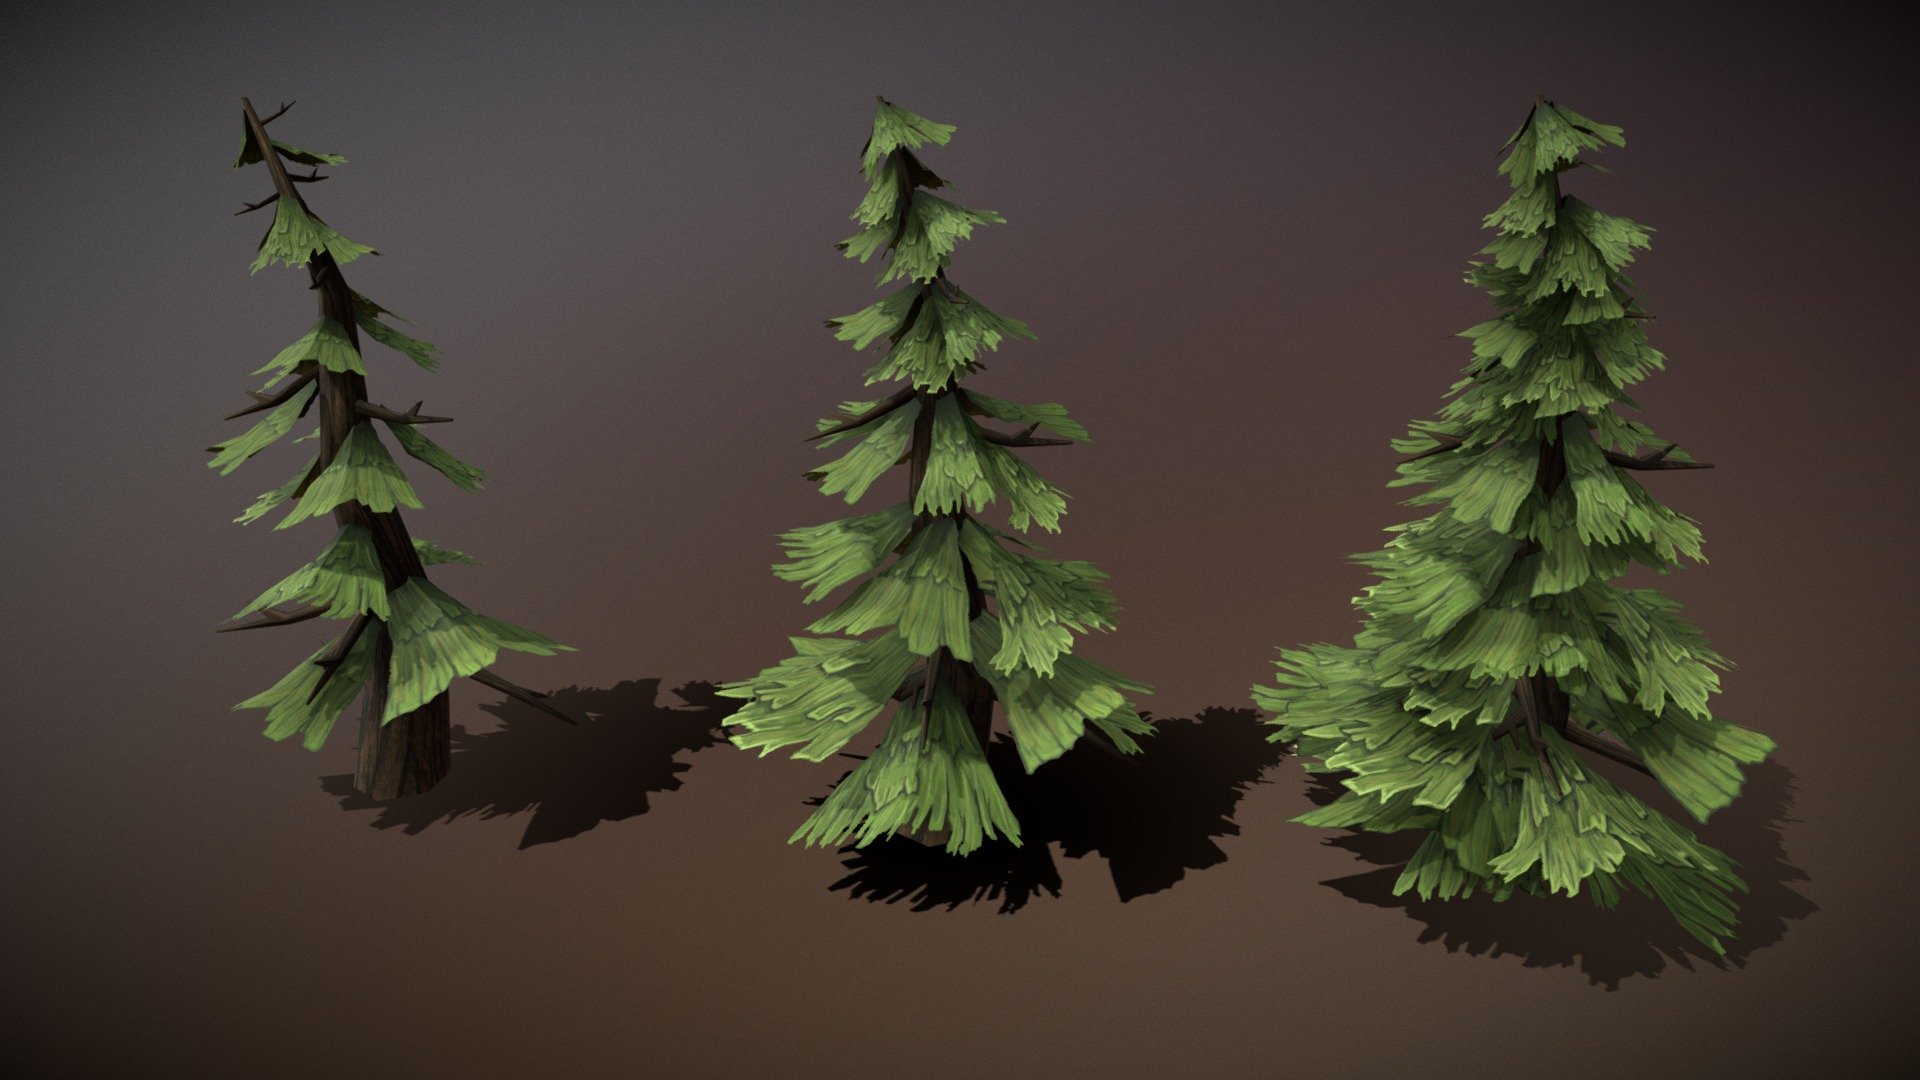 3 versions of stylized pine trees, made with blender.

The leaves were hand painted in photoshop 3d model